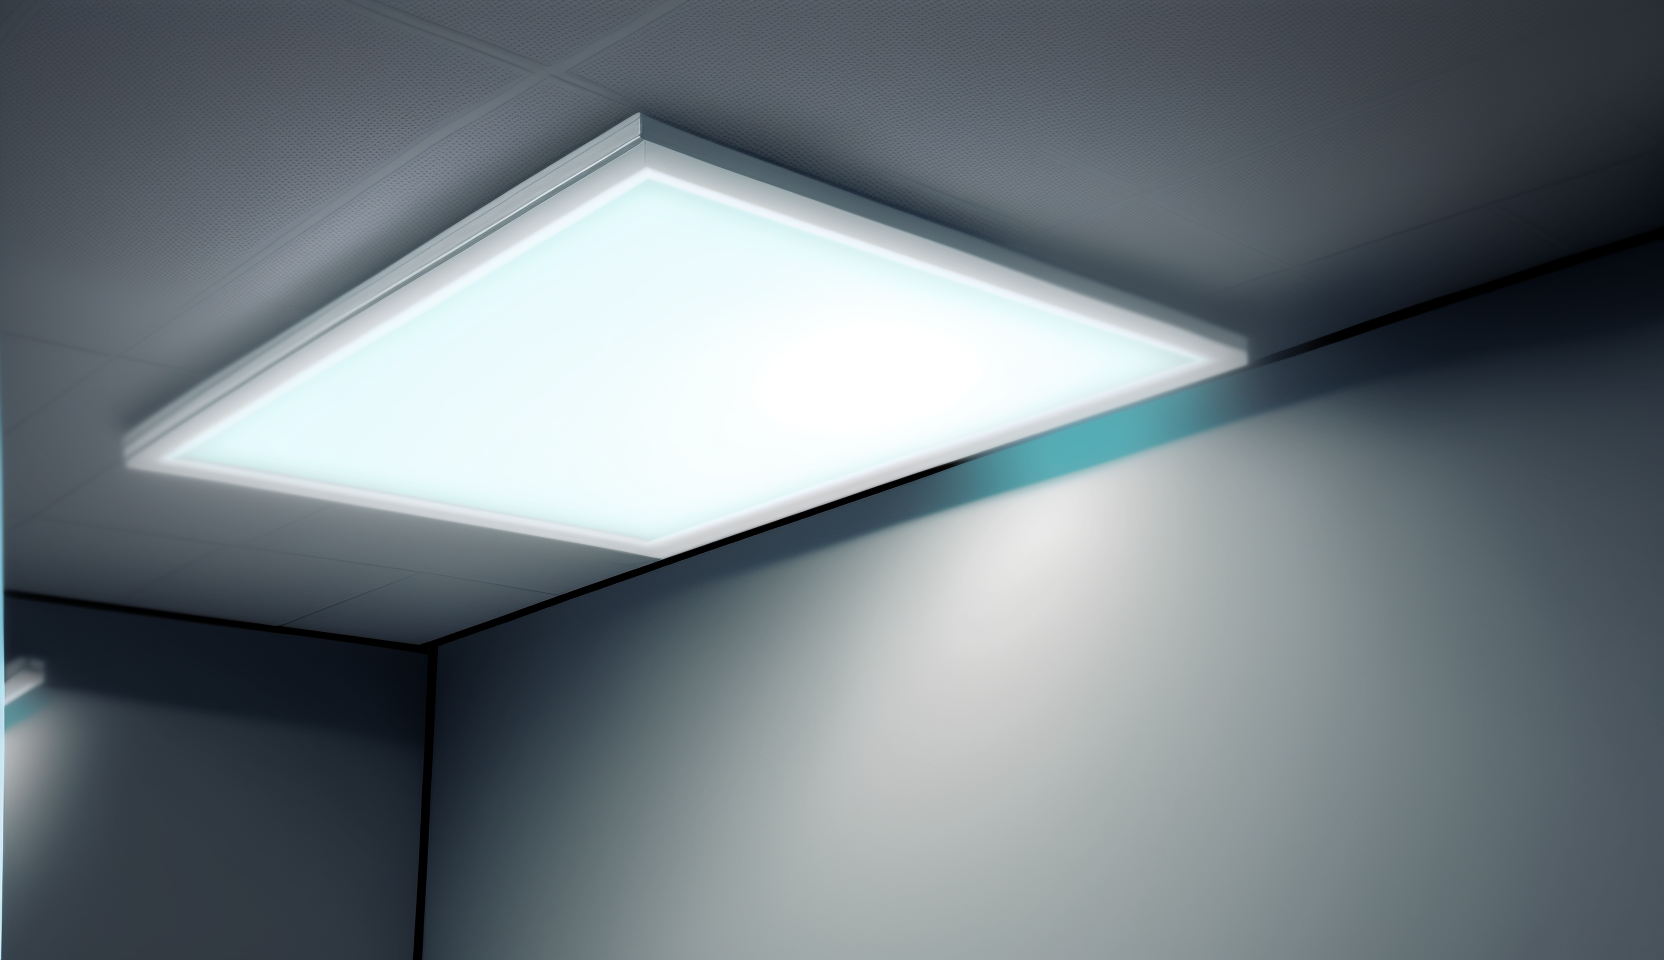 An AI generated image of an LED panel in a ceiling.